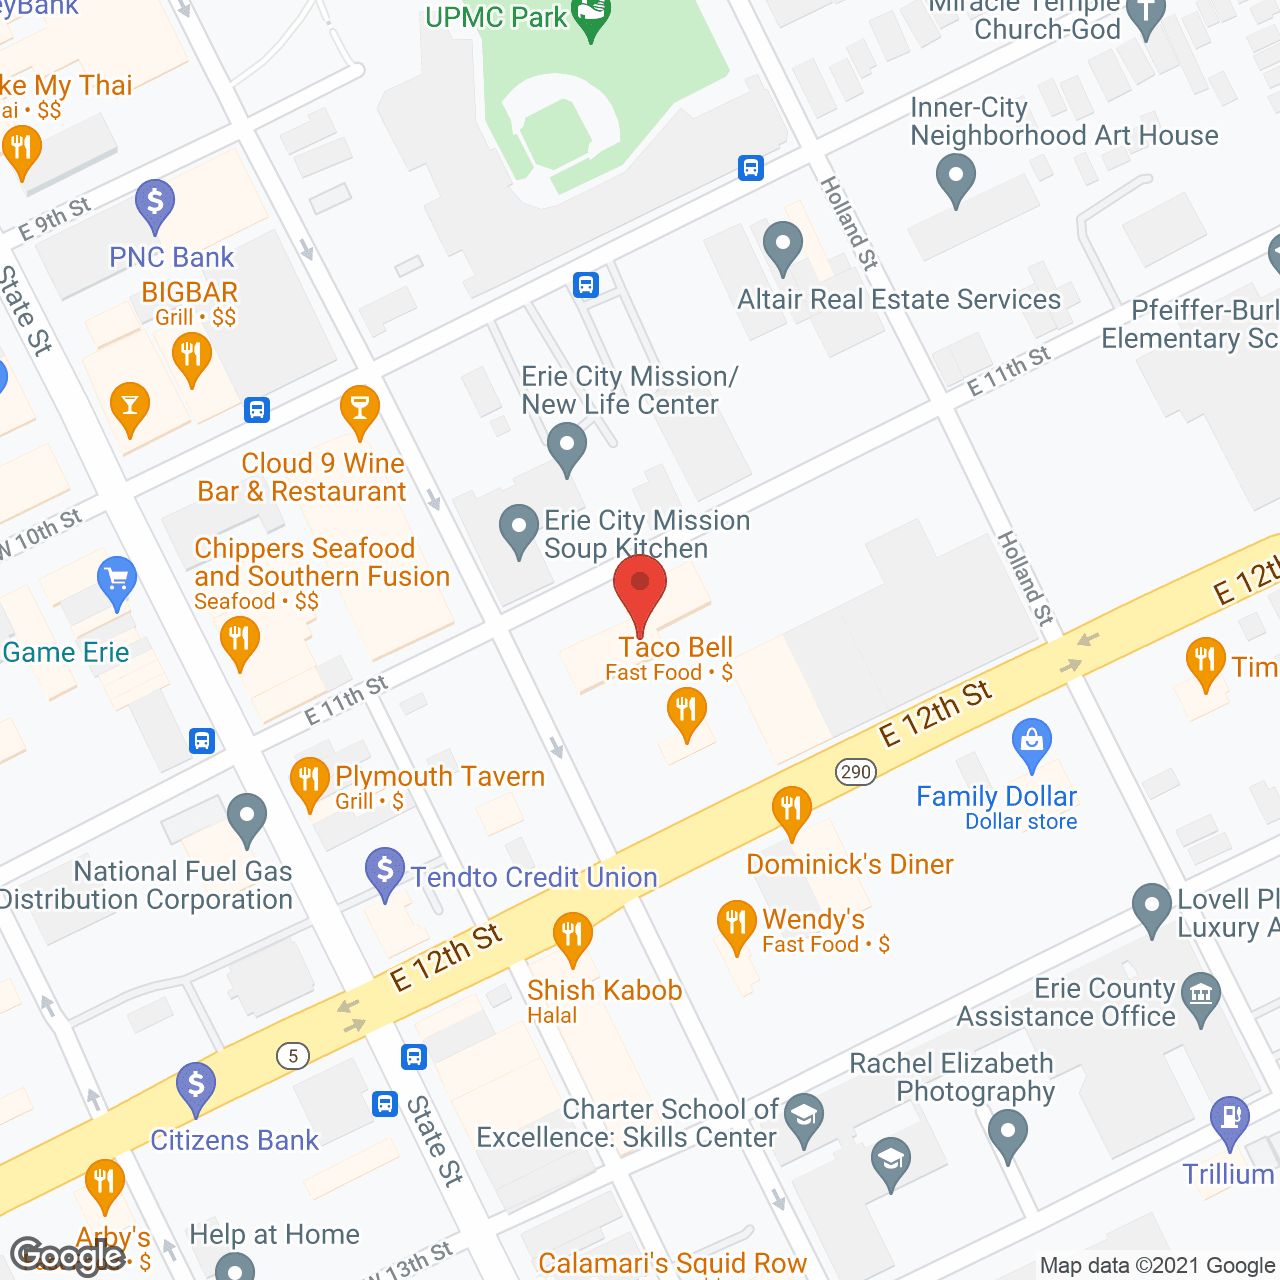 Friendship Towers in google map